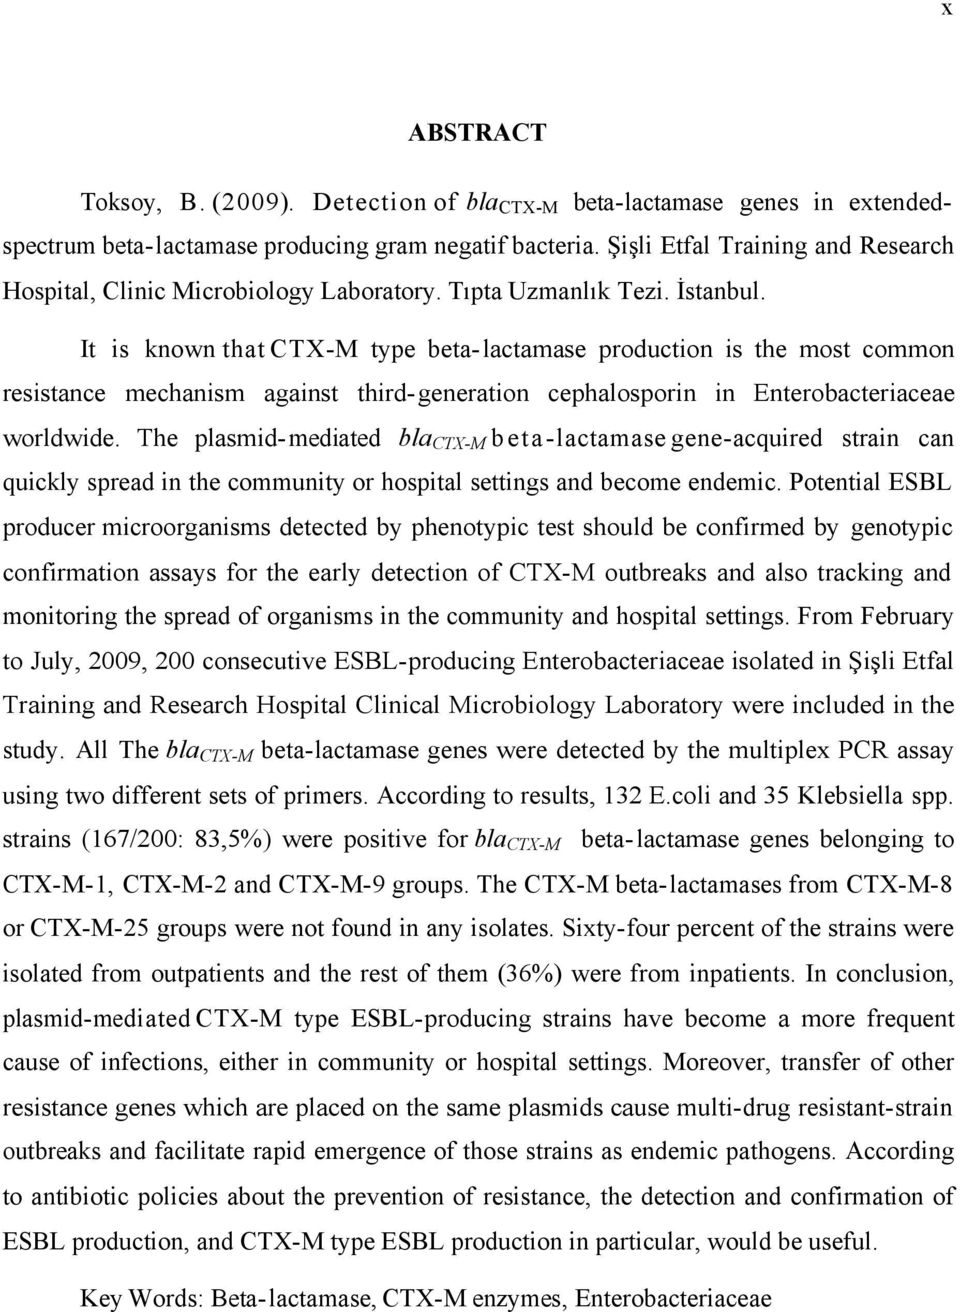 It is known that CTX-M type beta- lactamase production is the most common resistance mechanism against third- generation cephalosporin in Enterobacteriaceae worldwide.